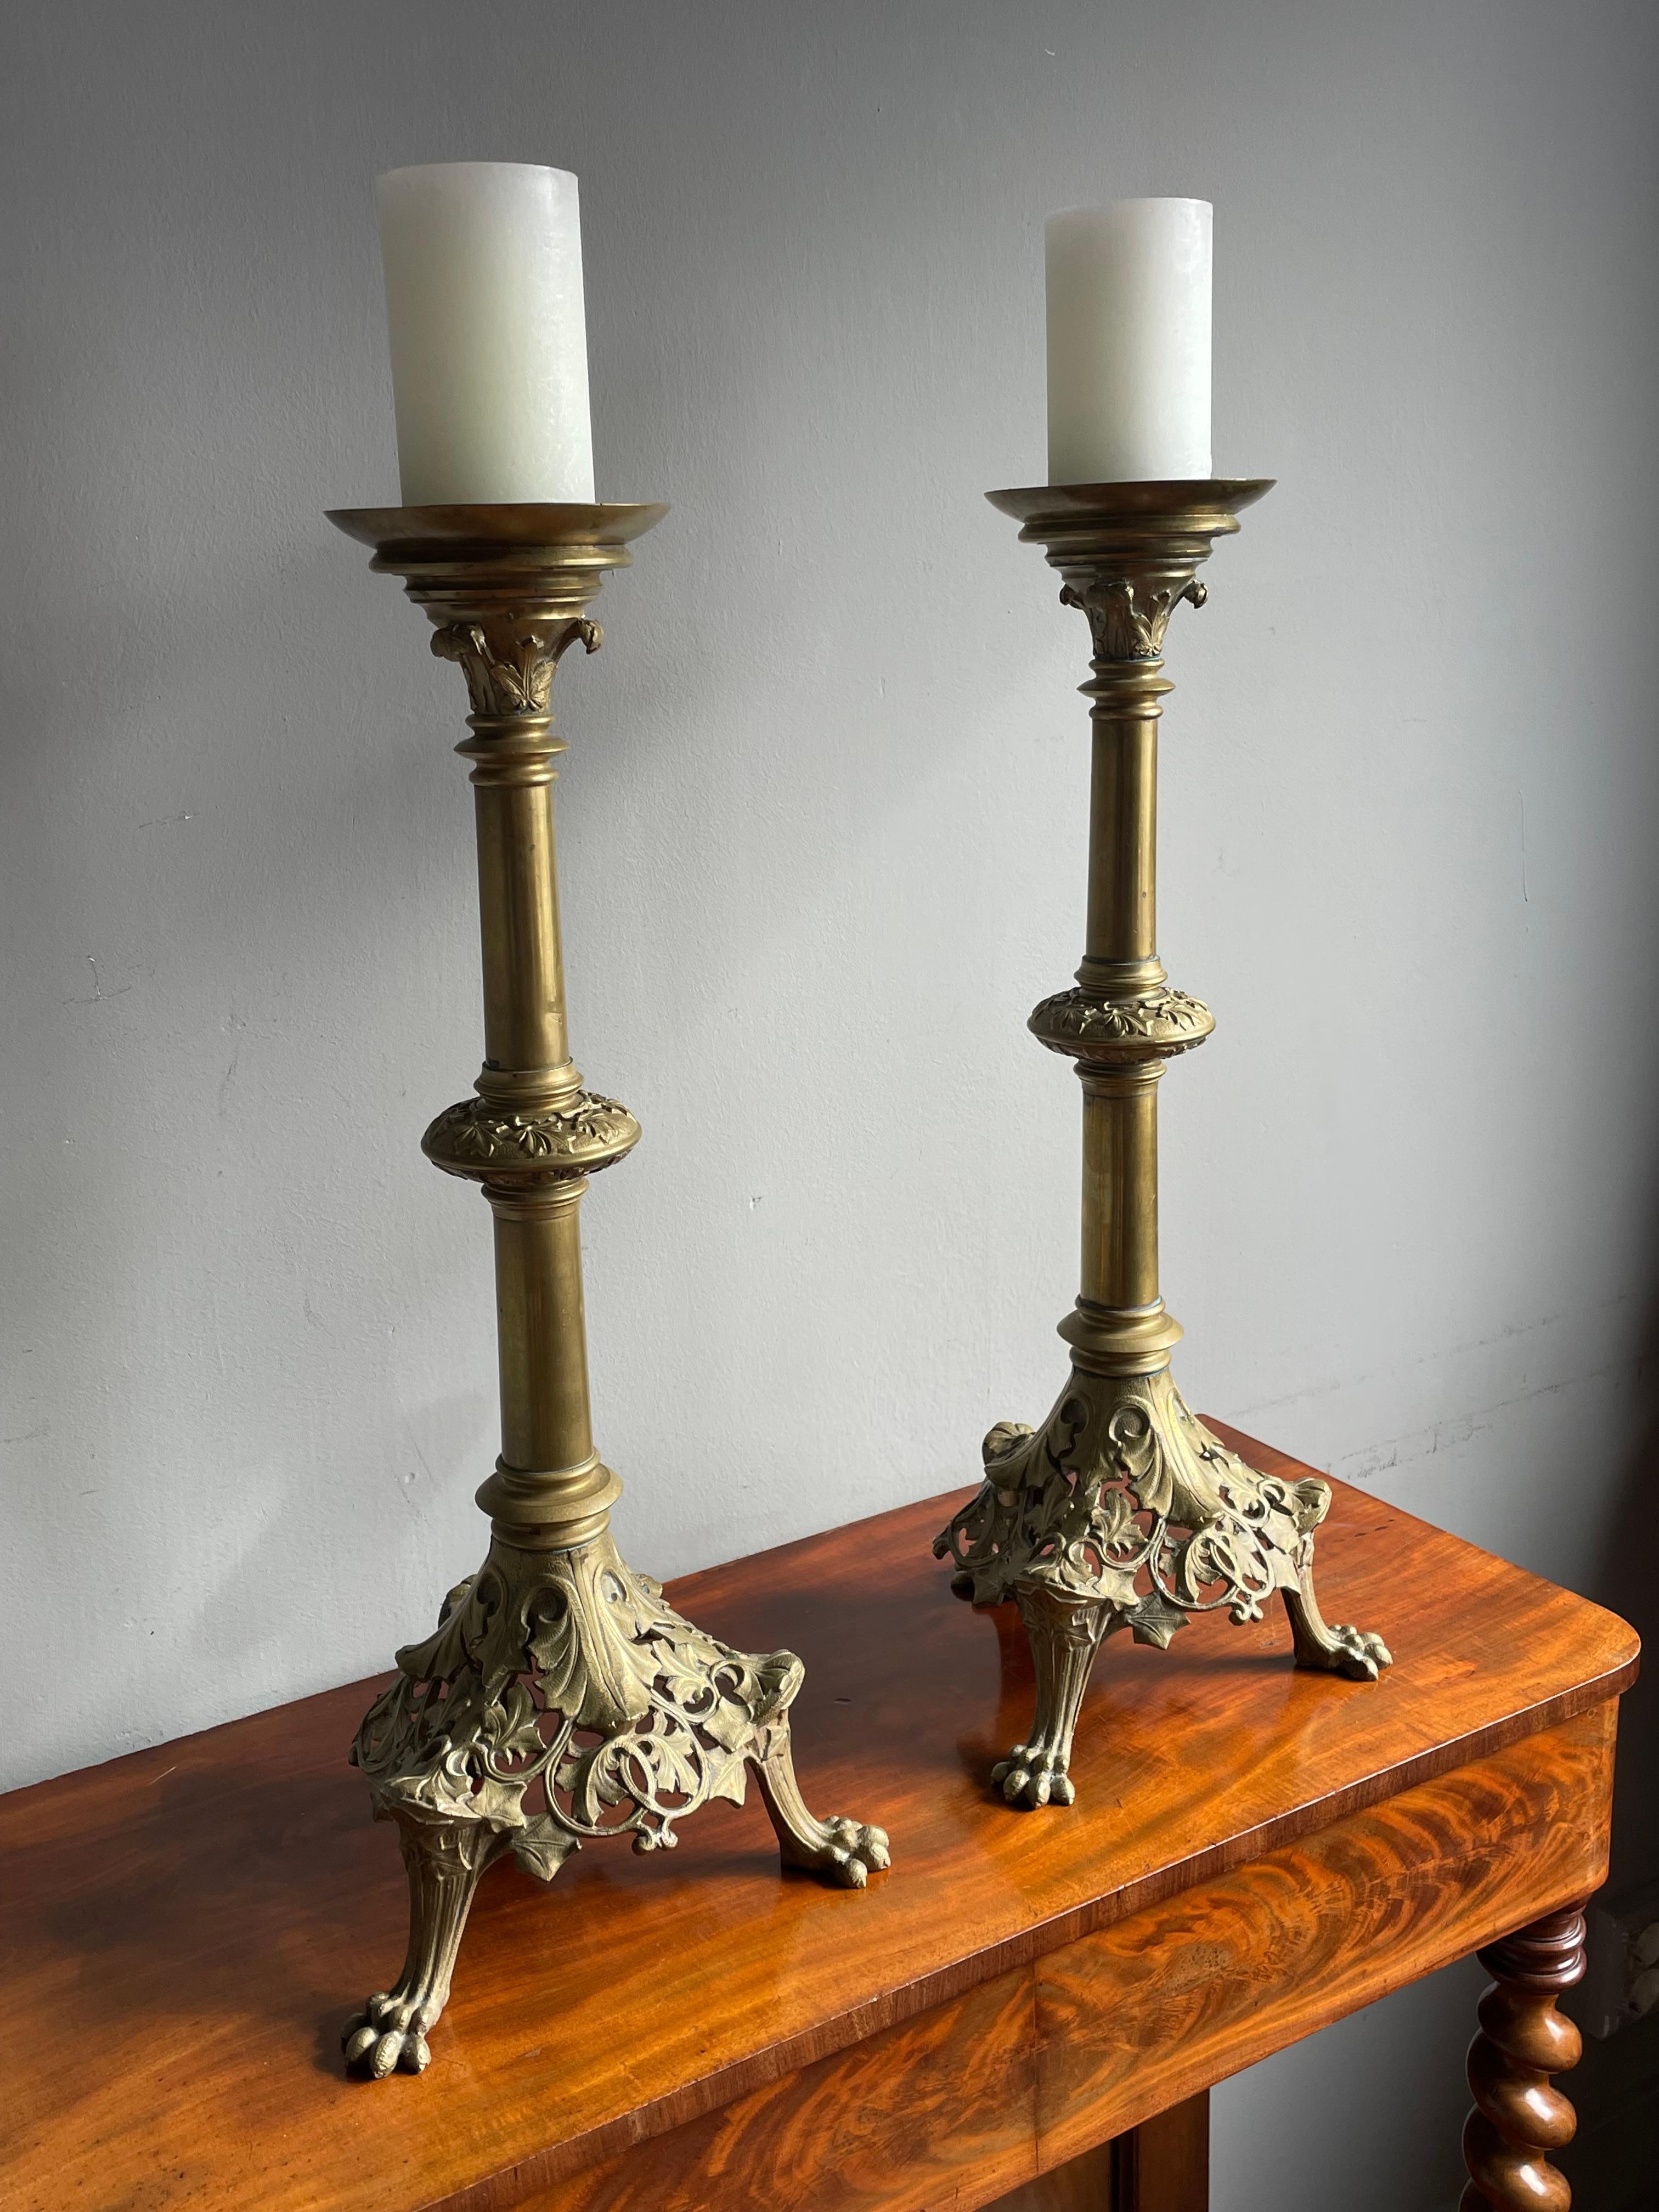 Antique Pair of Bronze Gothic Revival Church Altar Candlesticks / Candle Holders For Sale 2